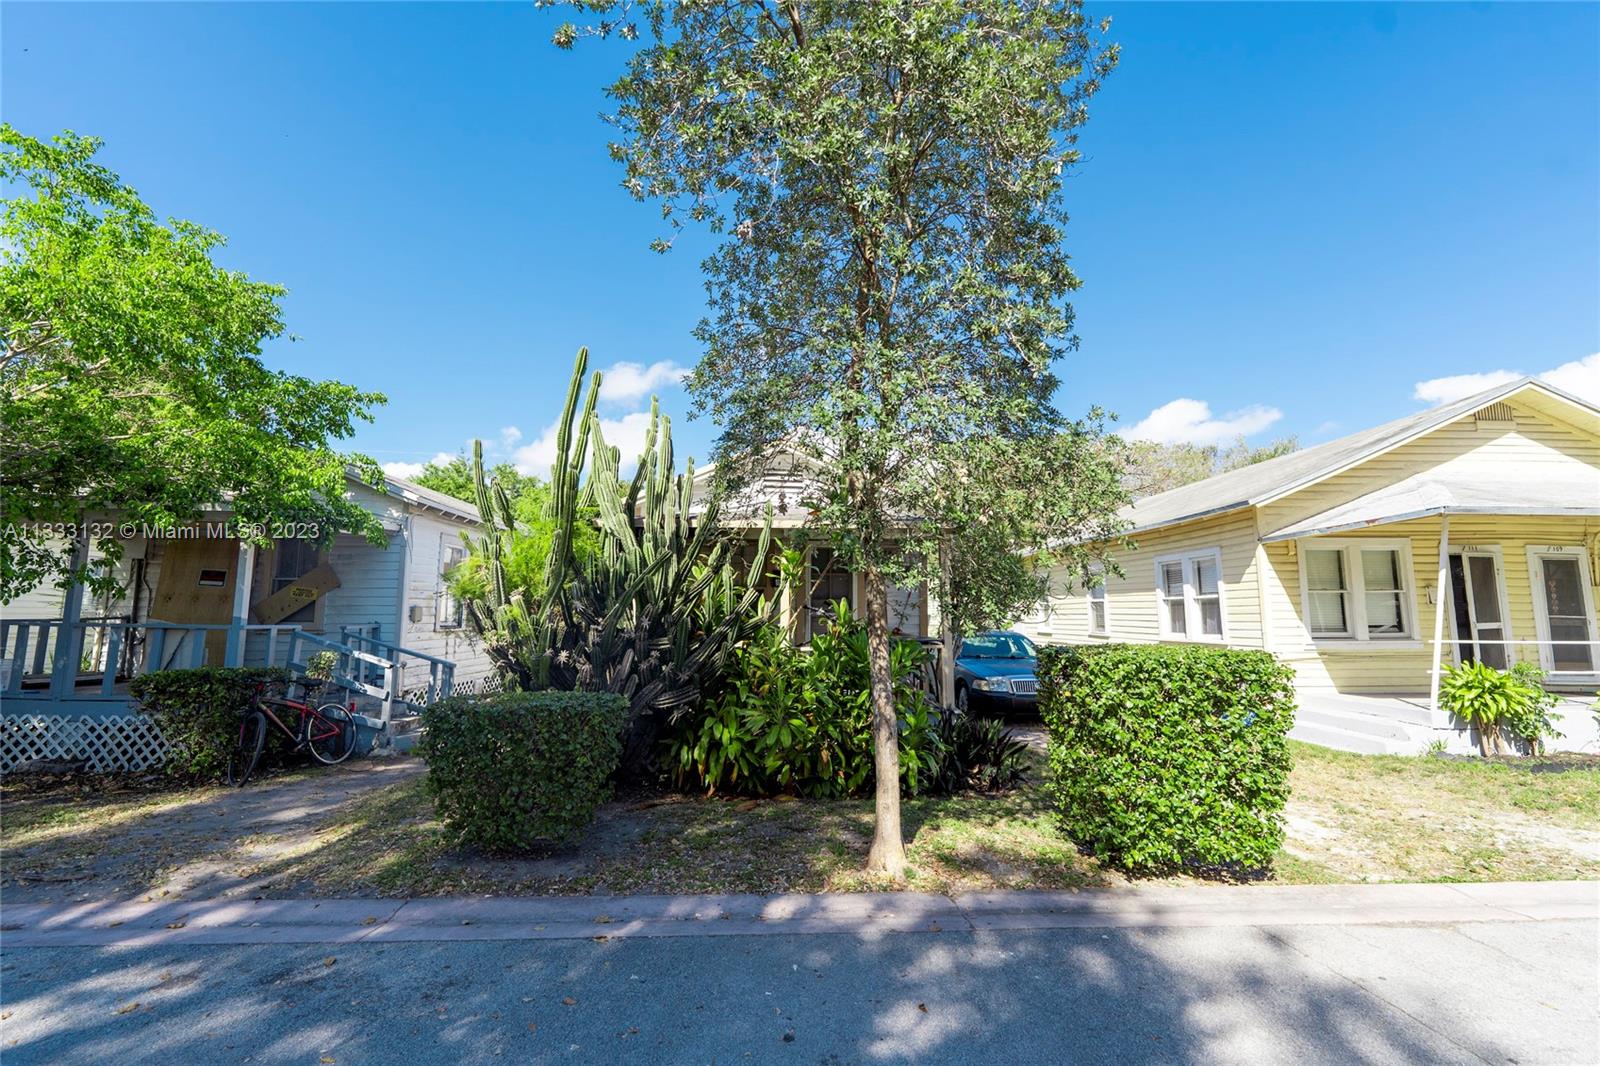 Duplex in Coral Gables steps away fromThesis Hotel on South Dixie Highway and Merrick Park. $13,800 yearly income,